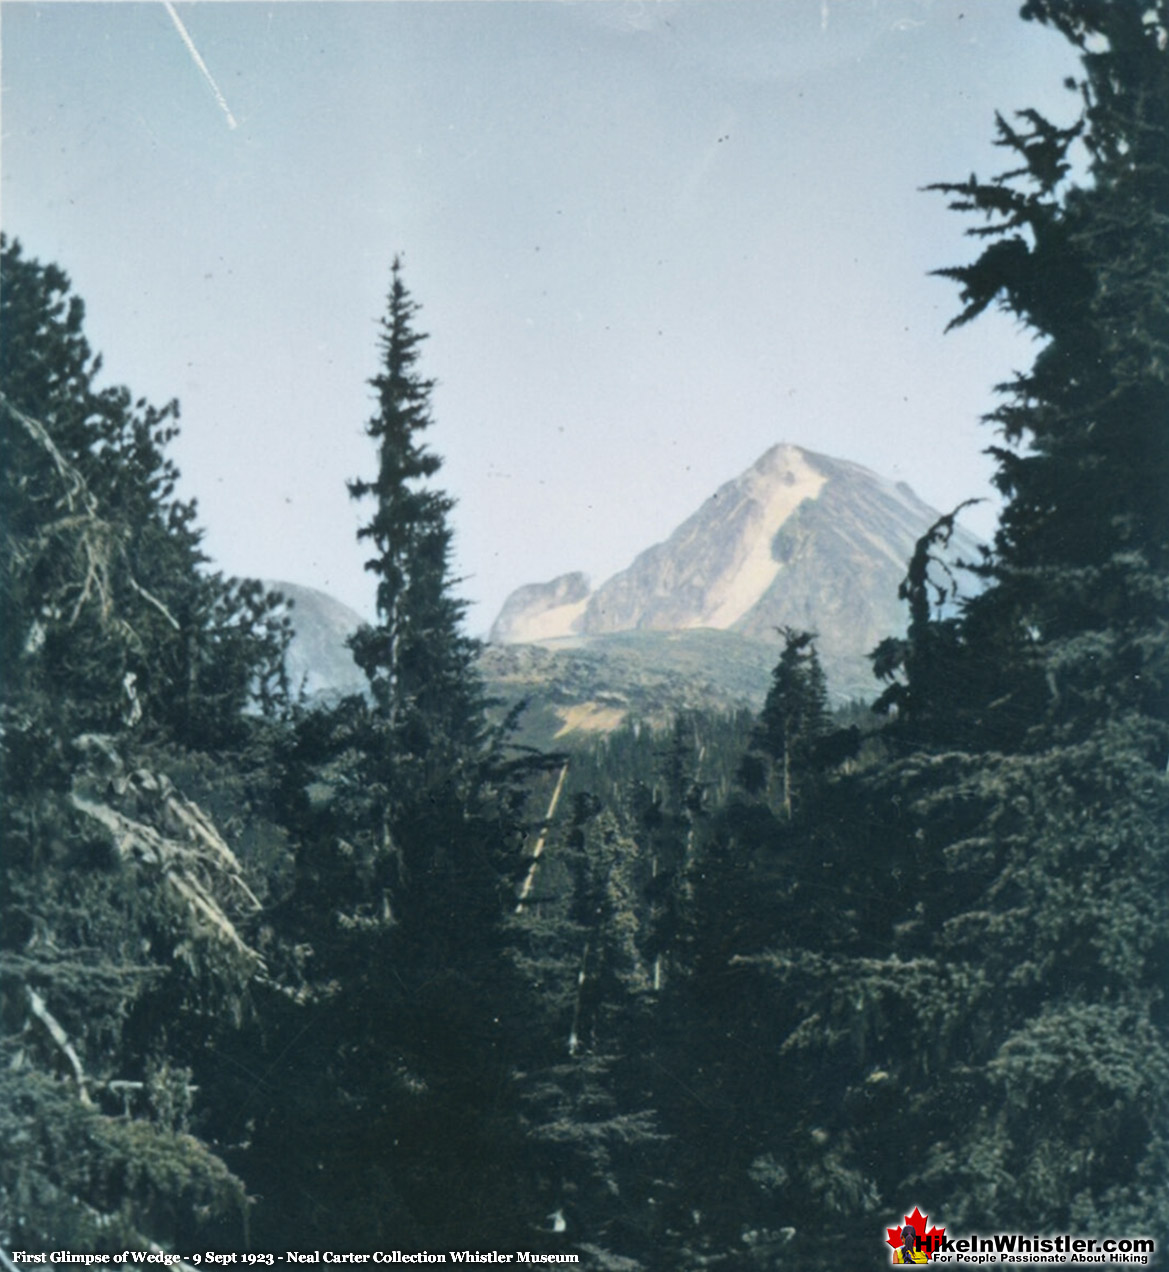 First Glimpse of Wedge Mountain 9 Sept 1923